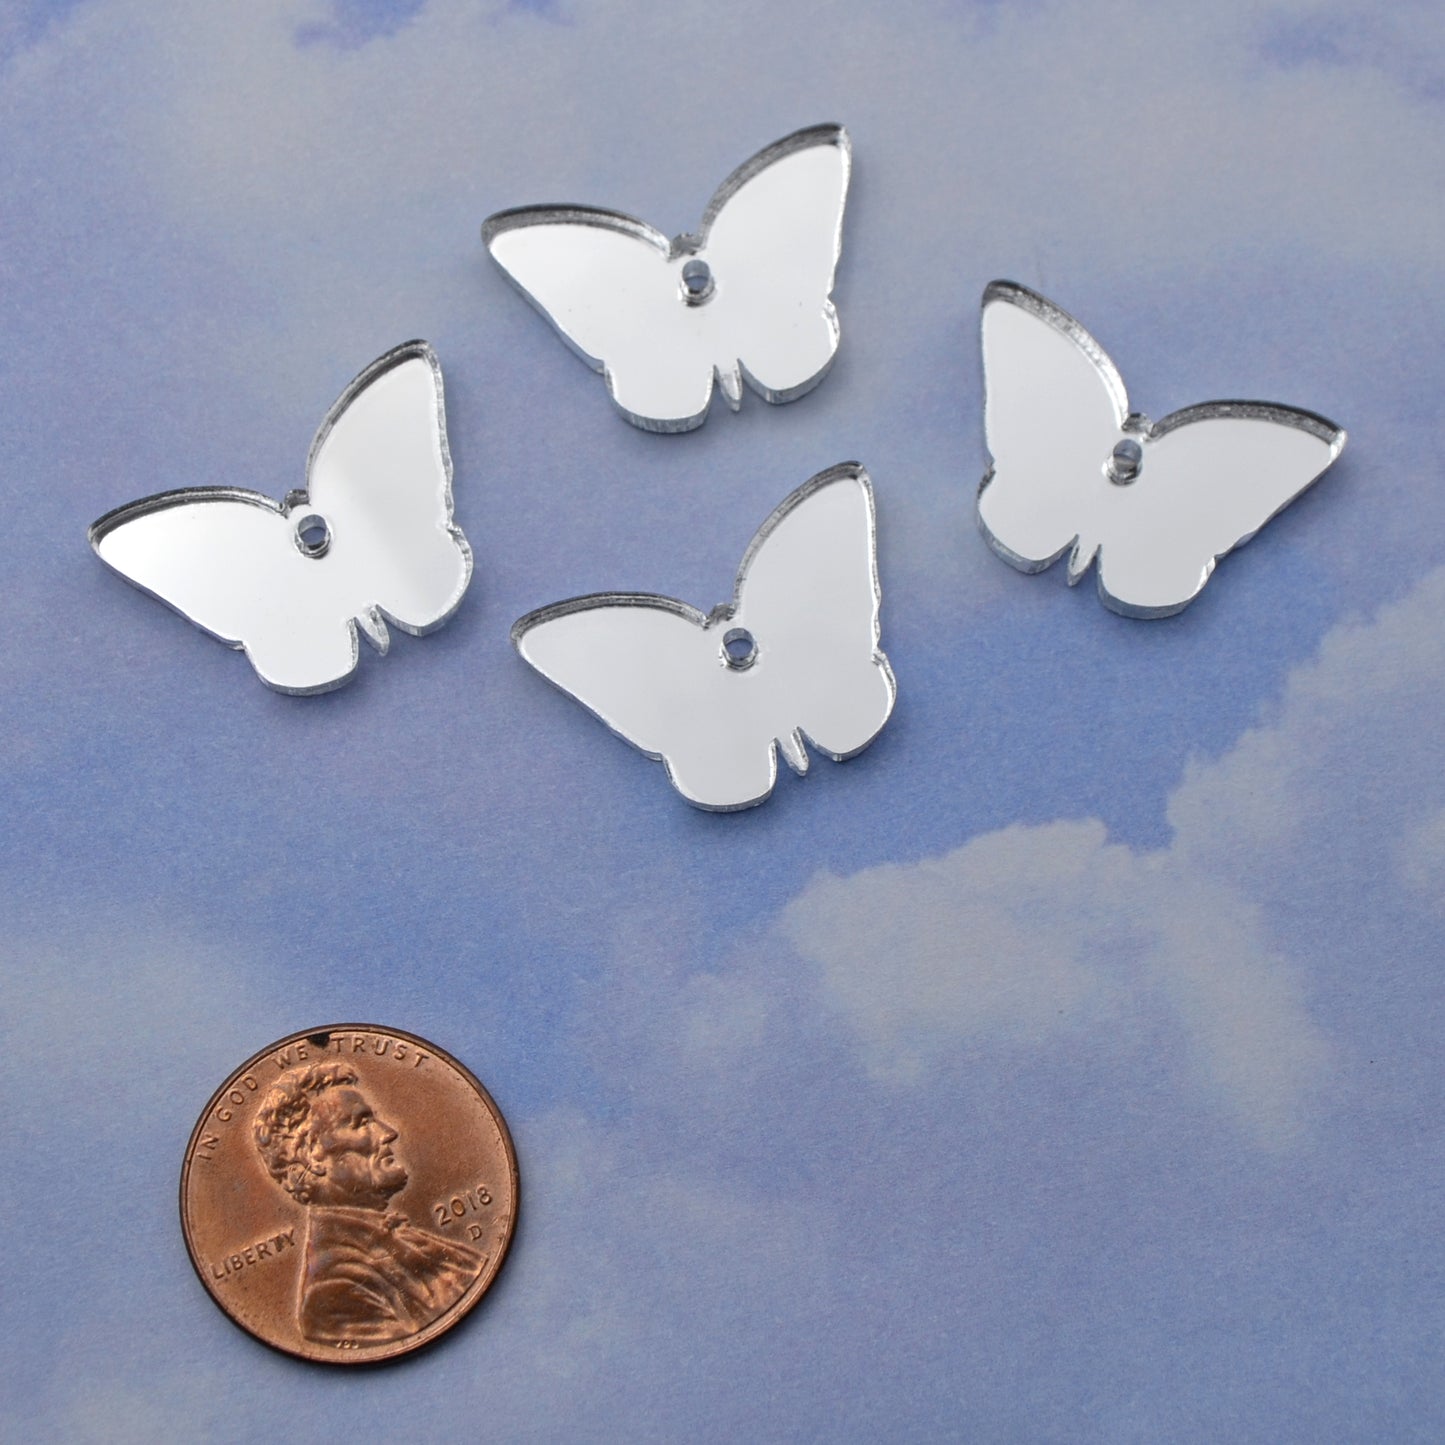 SILVER MIRROR BUTTERFLY CHARMS In Laser Cut Acrylic